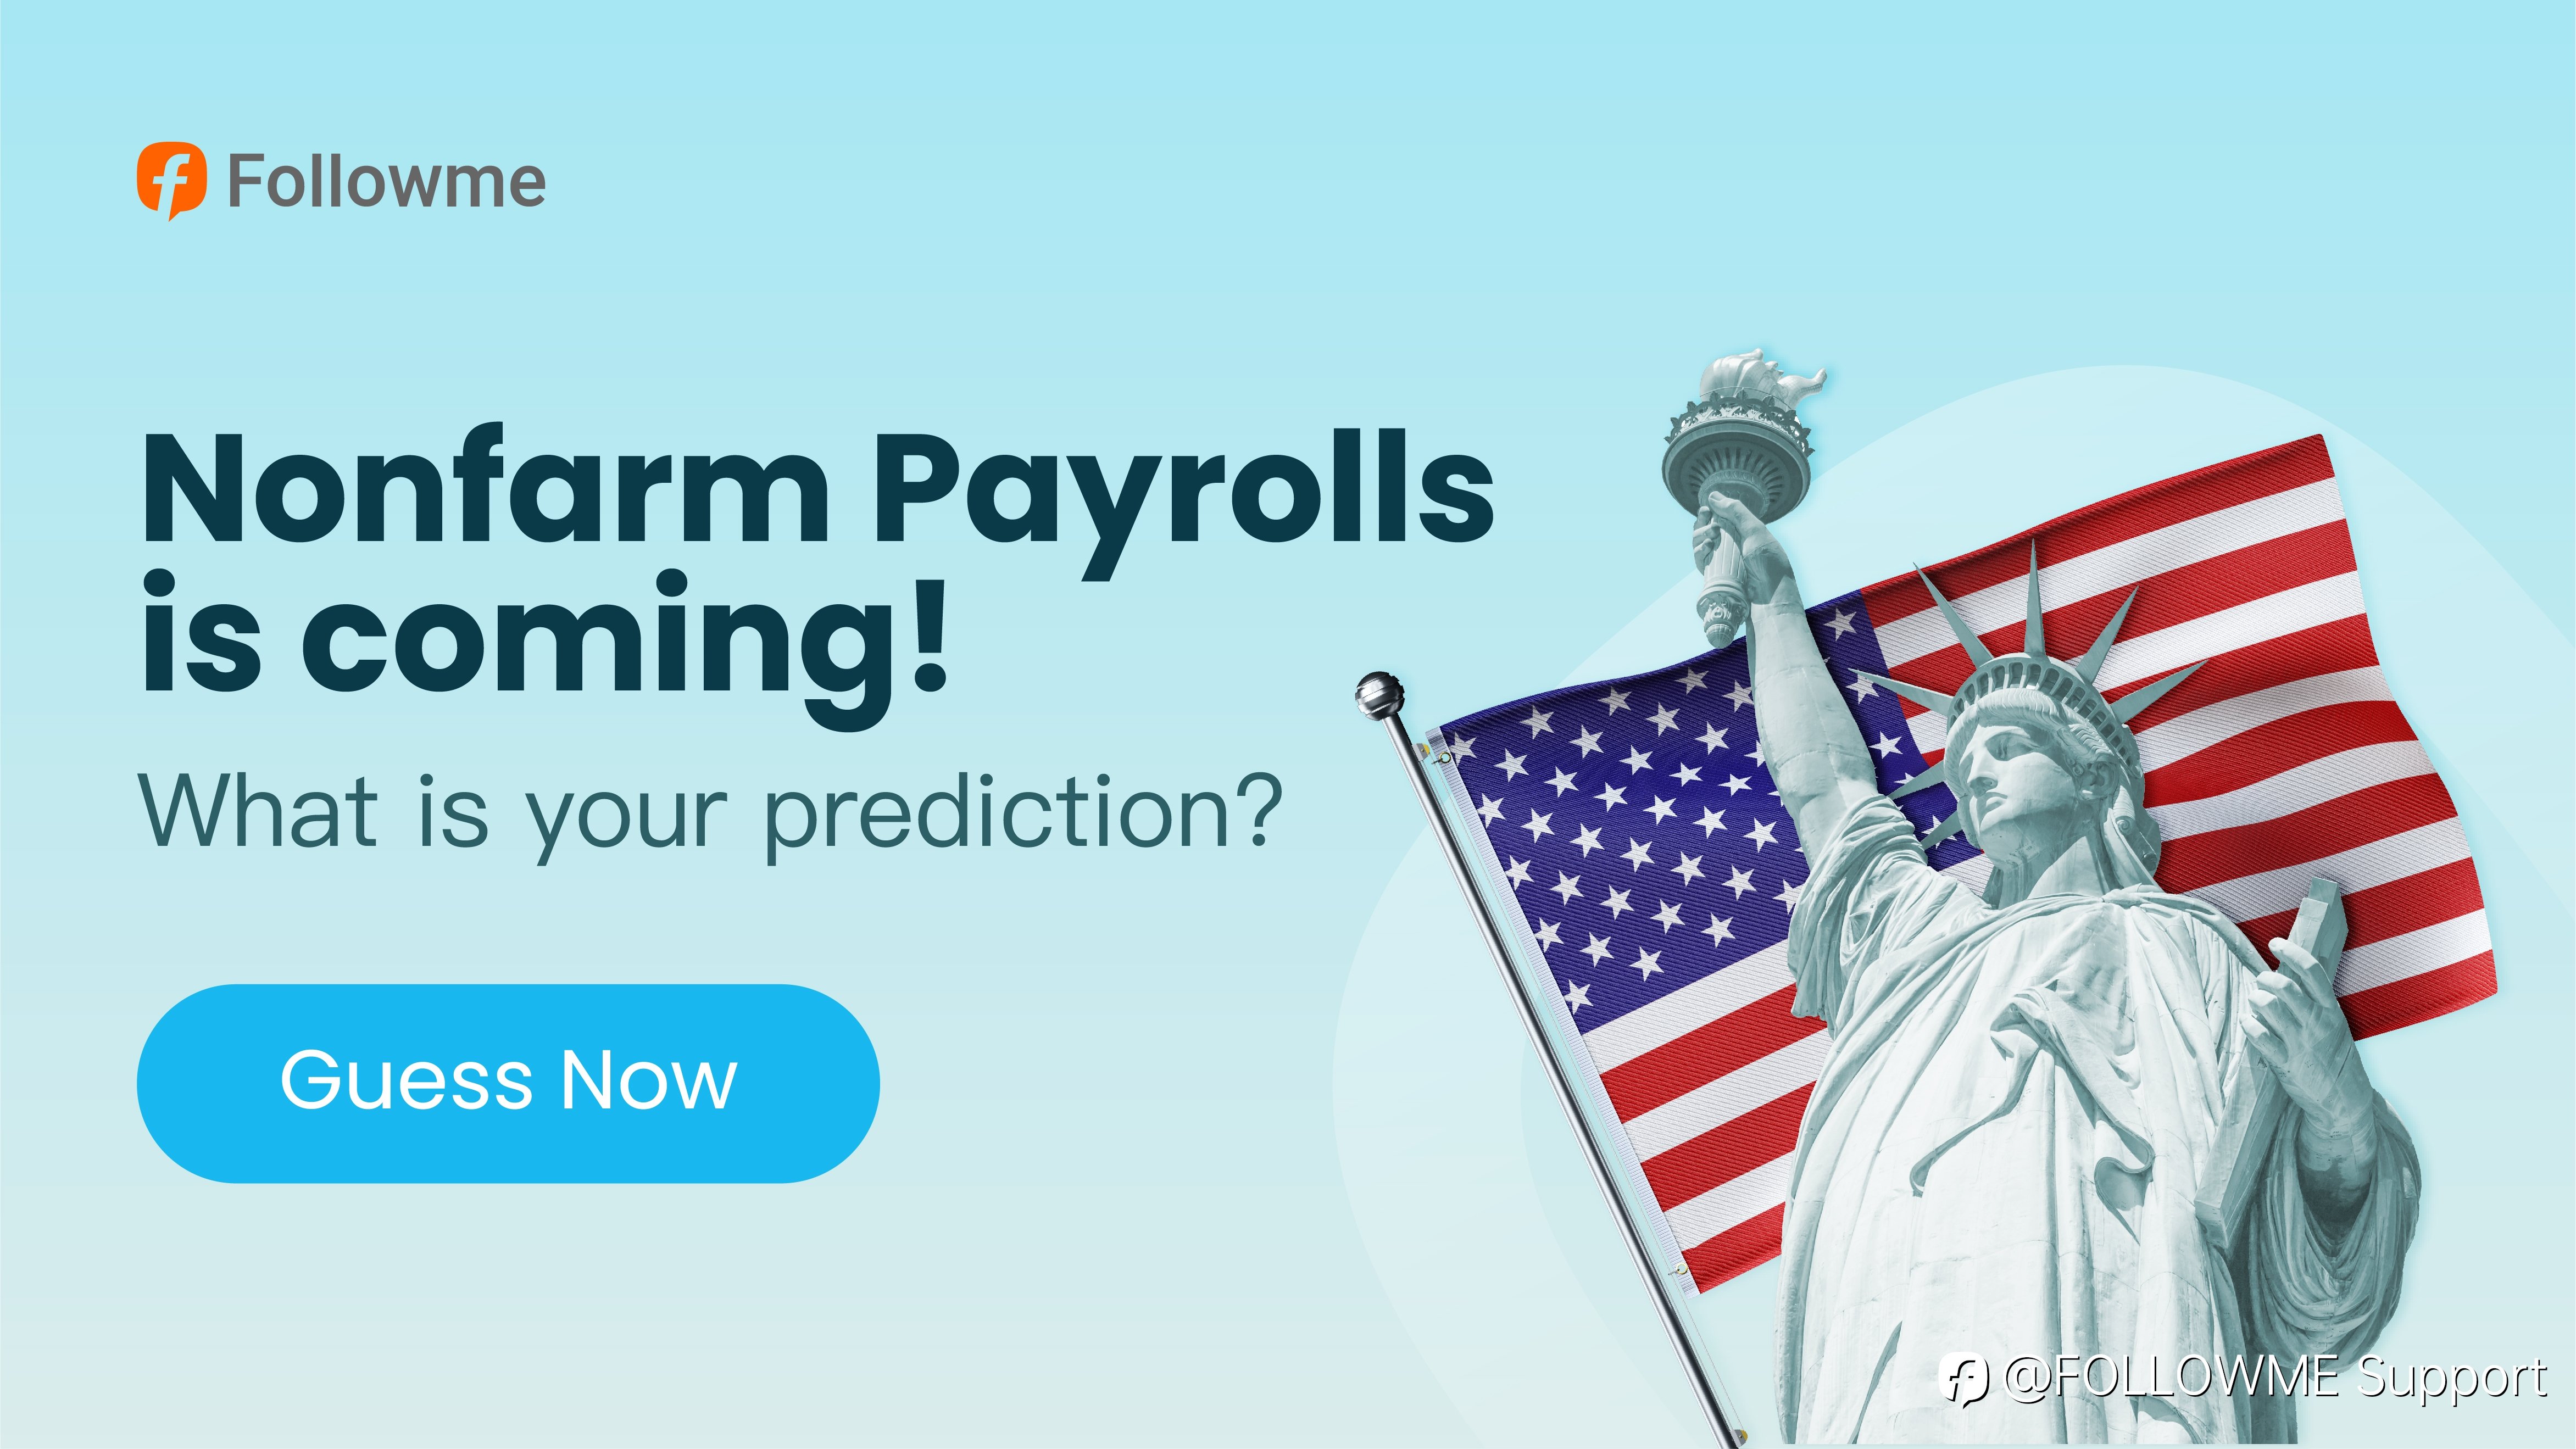 What is Your Prediction for March Nonfarm Payrolls?